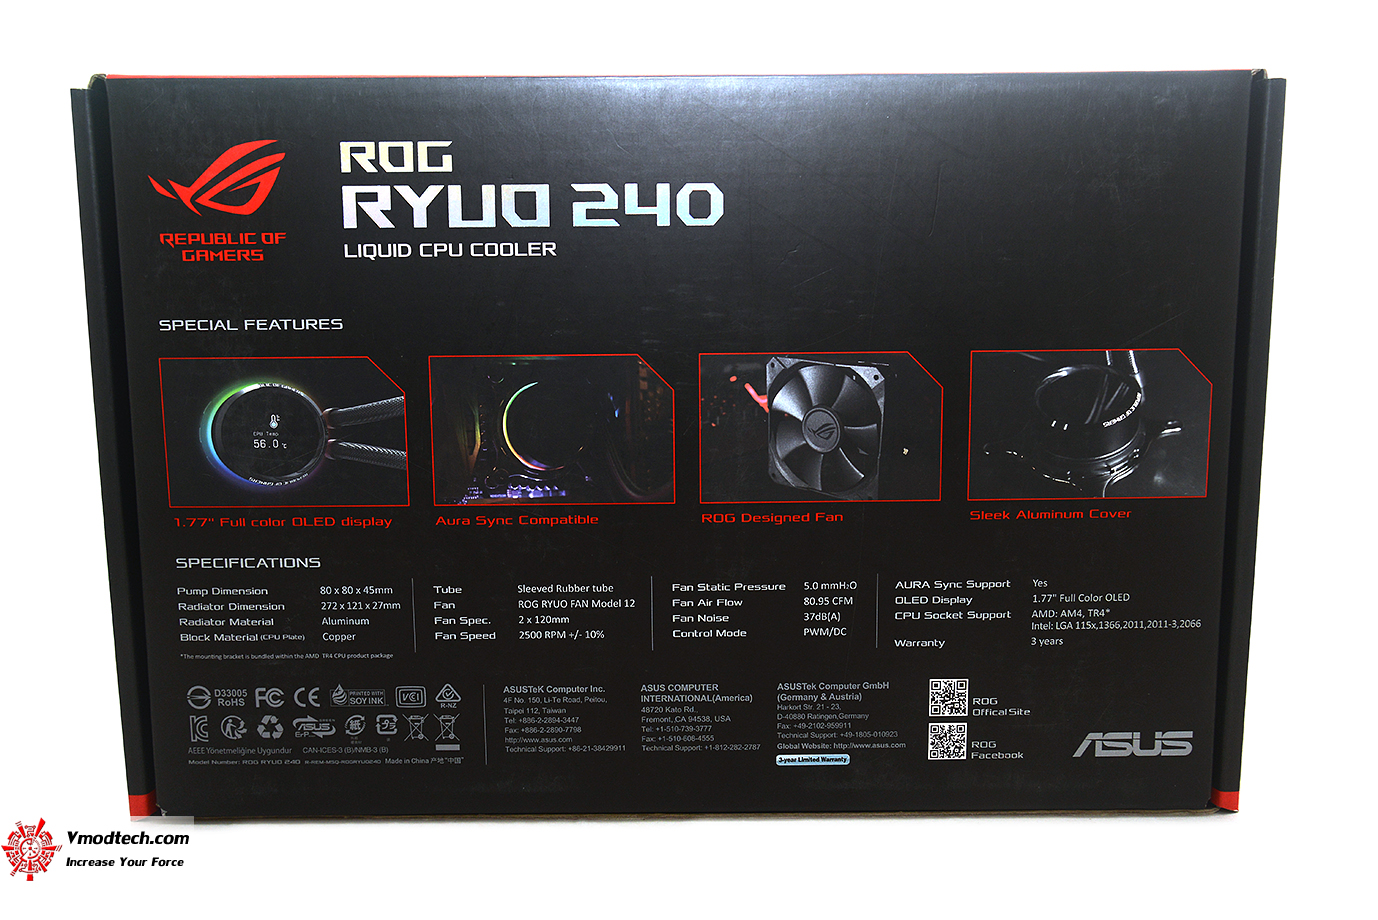 dsc 0579 ASUS ROG Ryuo 240 all in one liquid CPU cooler Review